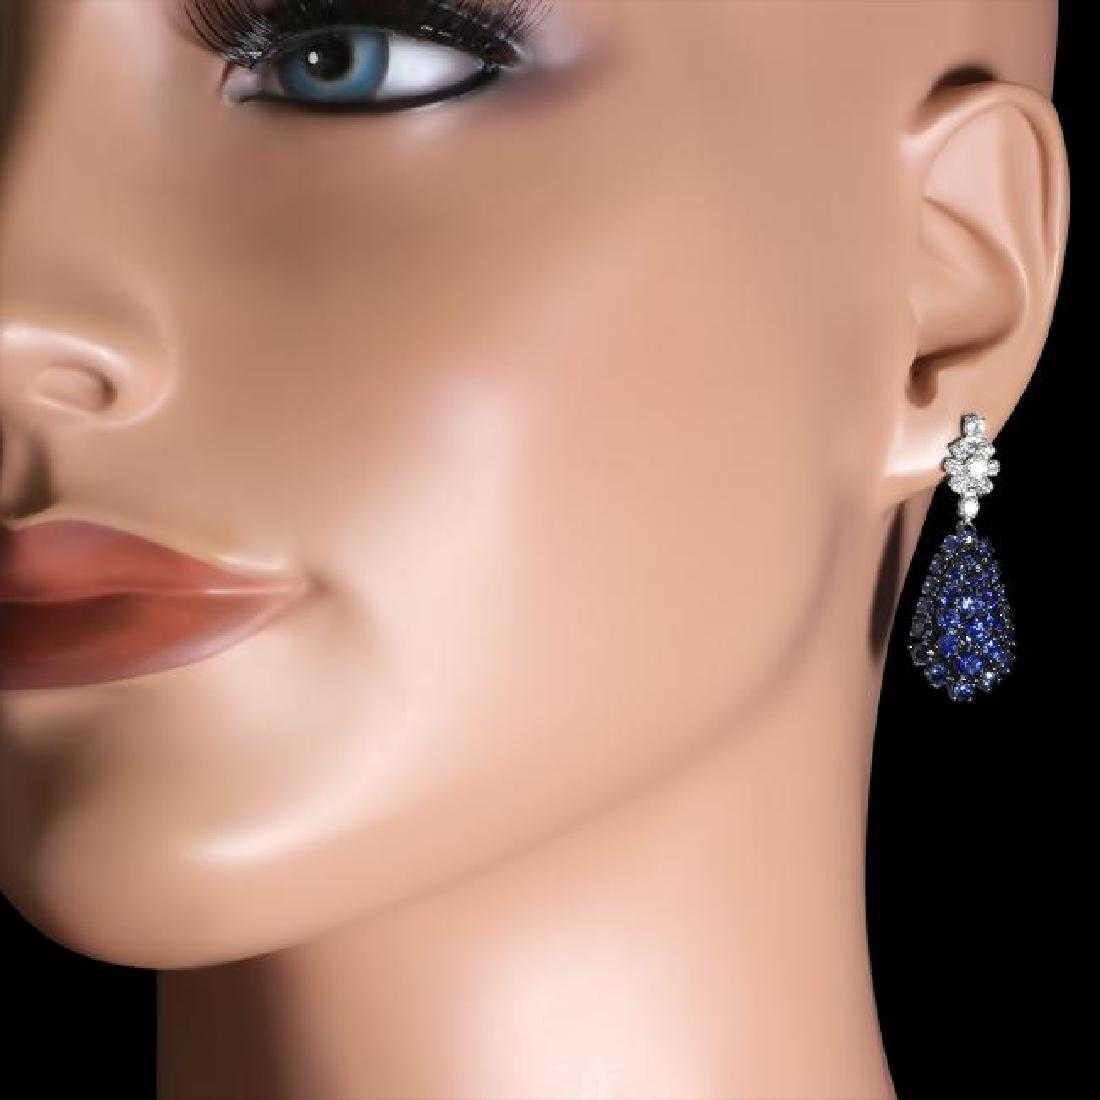 14K Black and White Gold 7.04ct Sapphire and 0.72ct Diamond Earrings